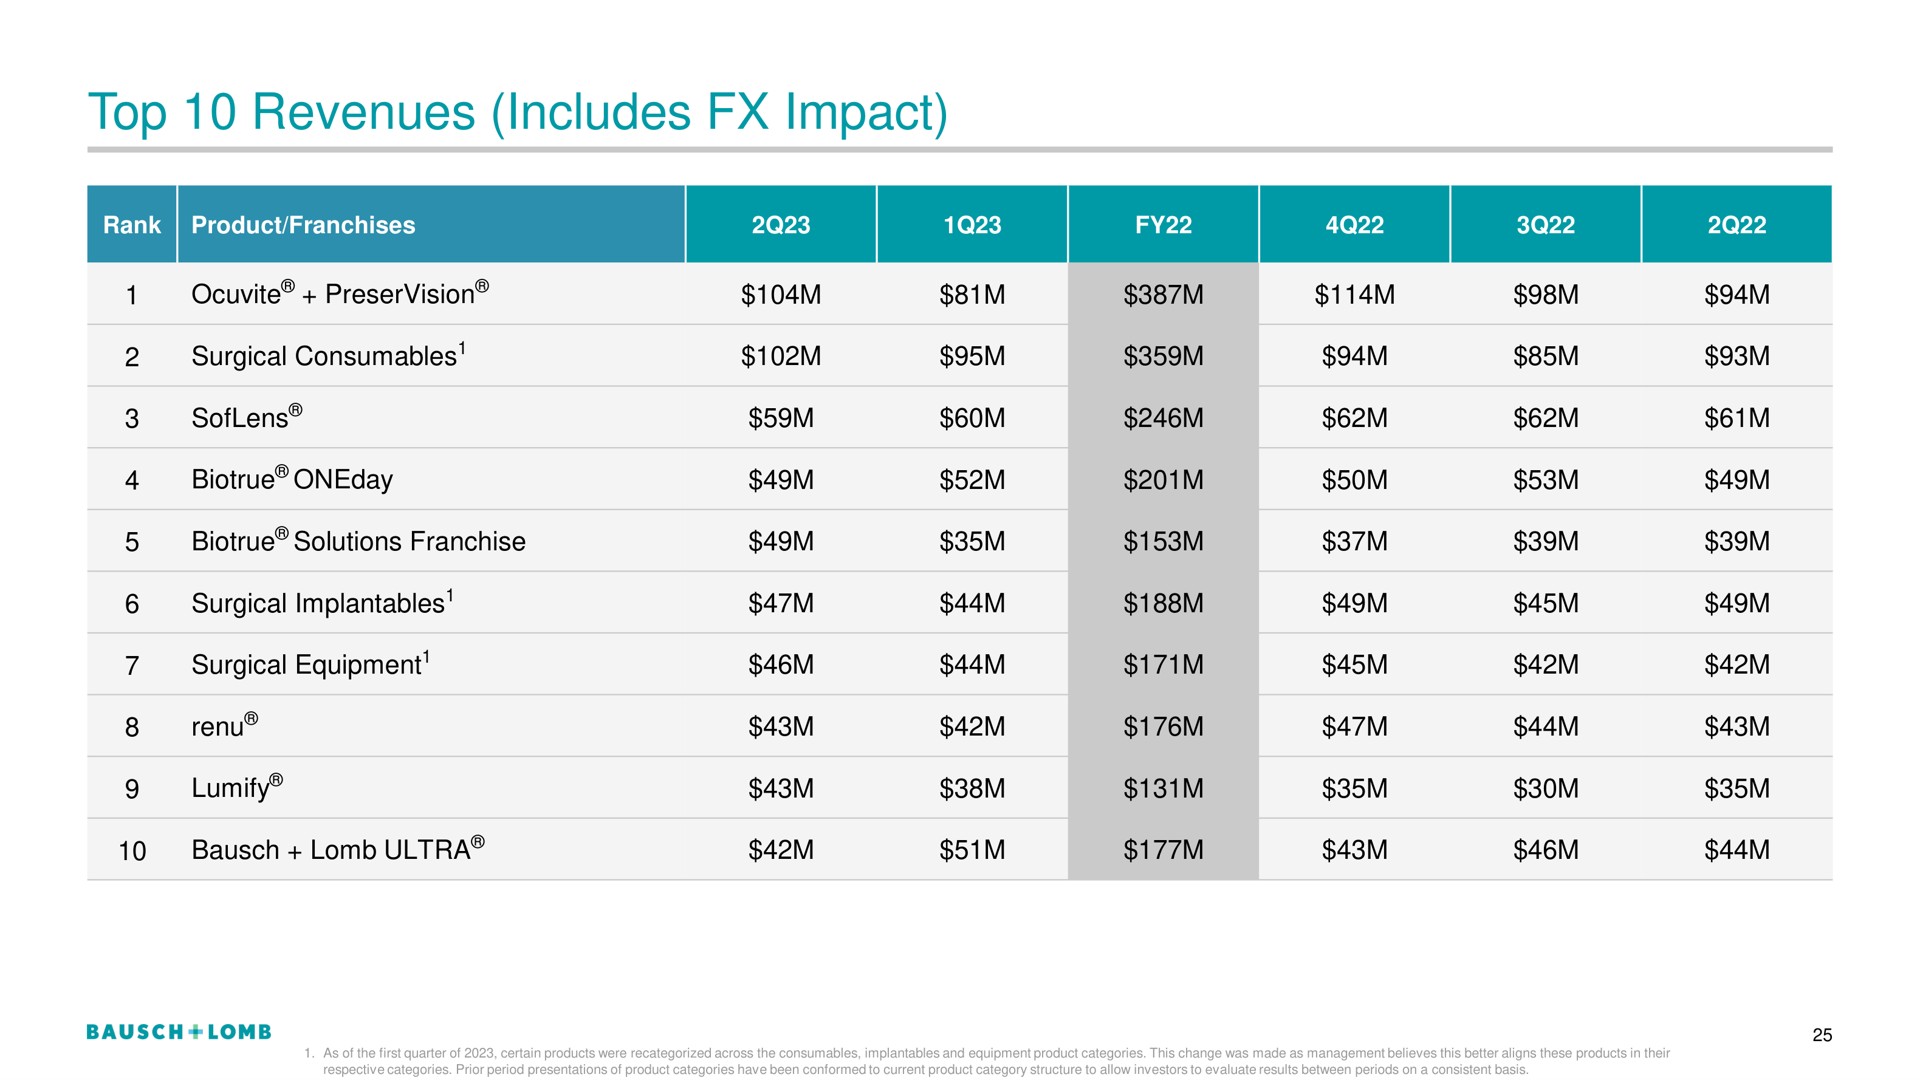 top revenues includes impact | Bausch+Lomb